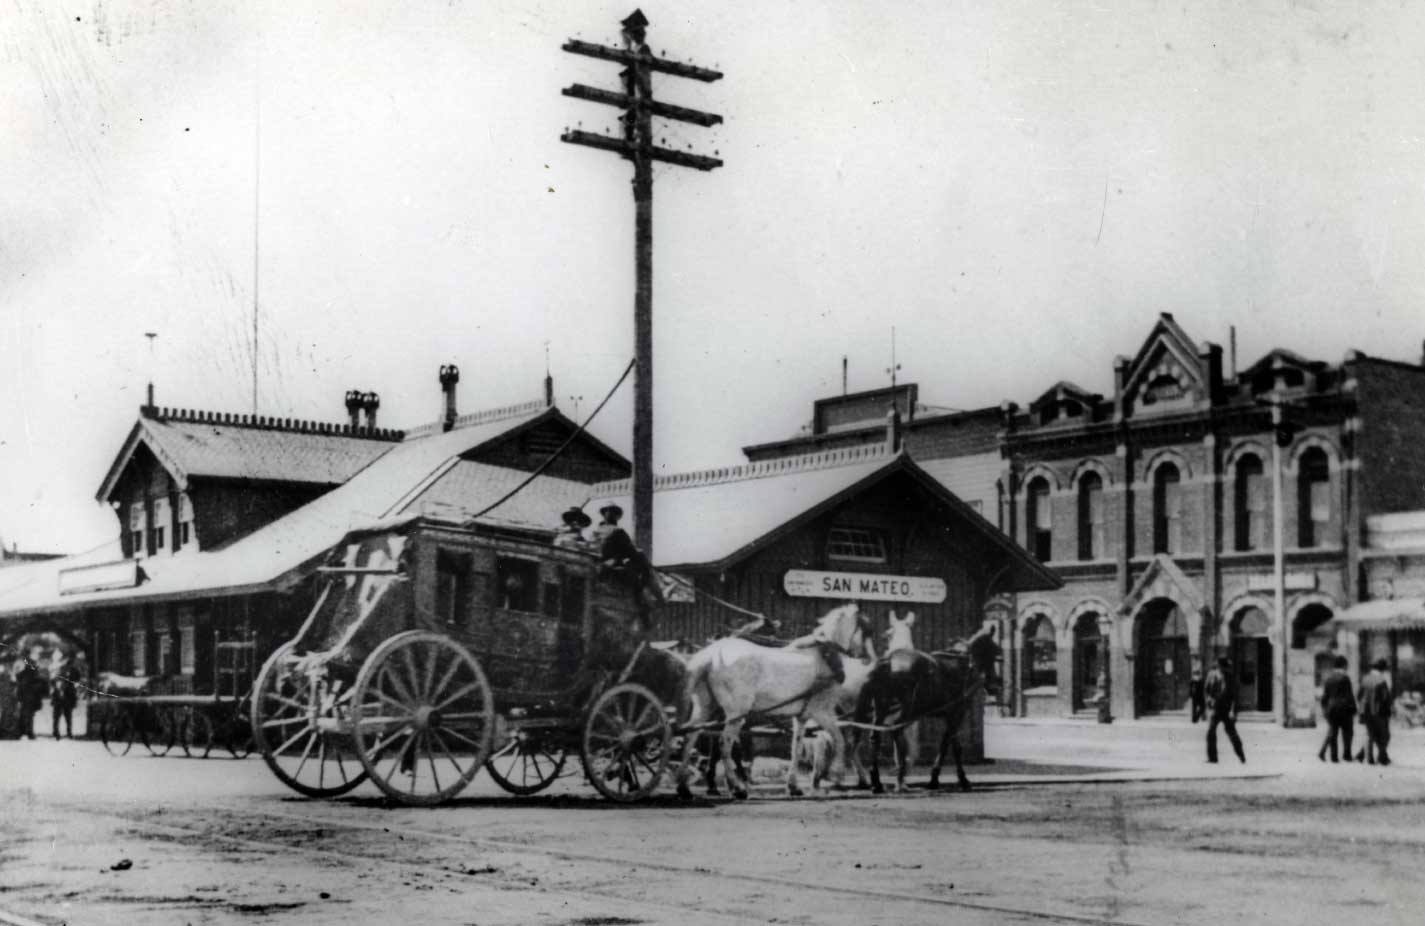 Archival photo of Stagecoach at San Mateo Train Station